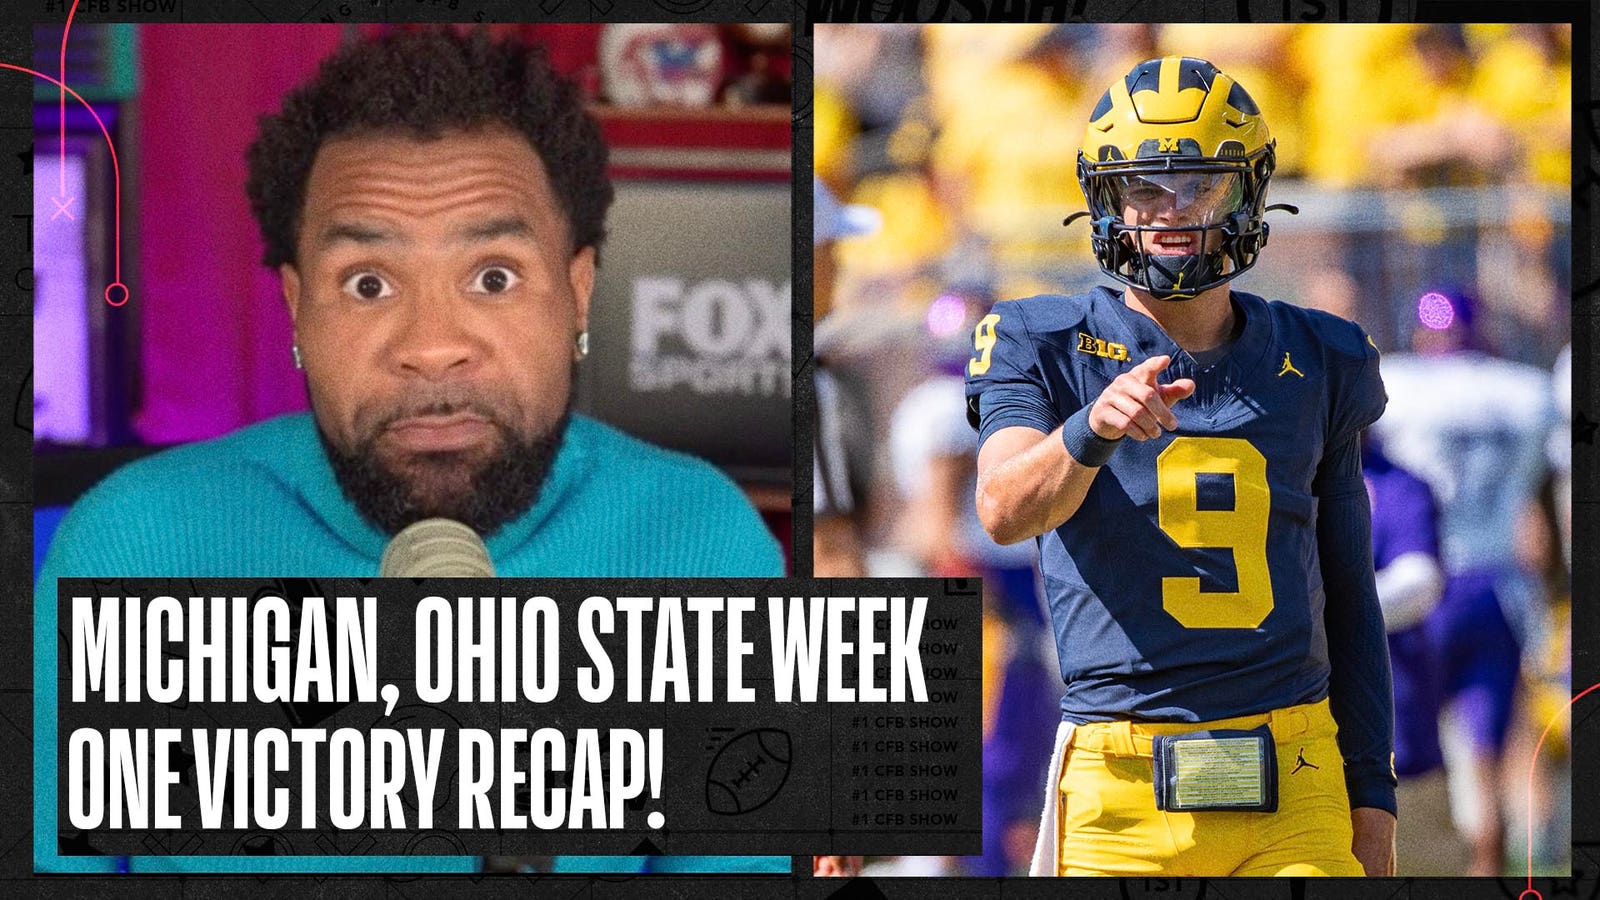 Breaking the big wins for Michigan is Ohio State